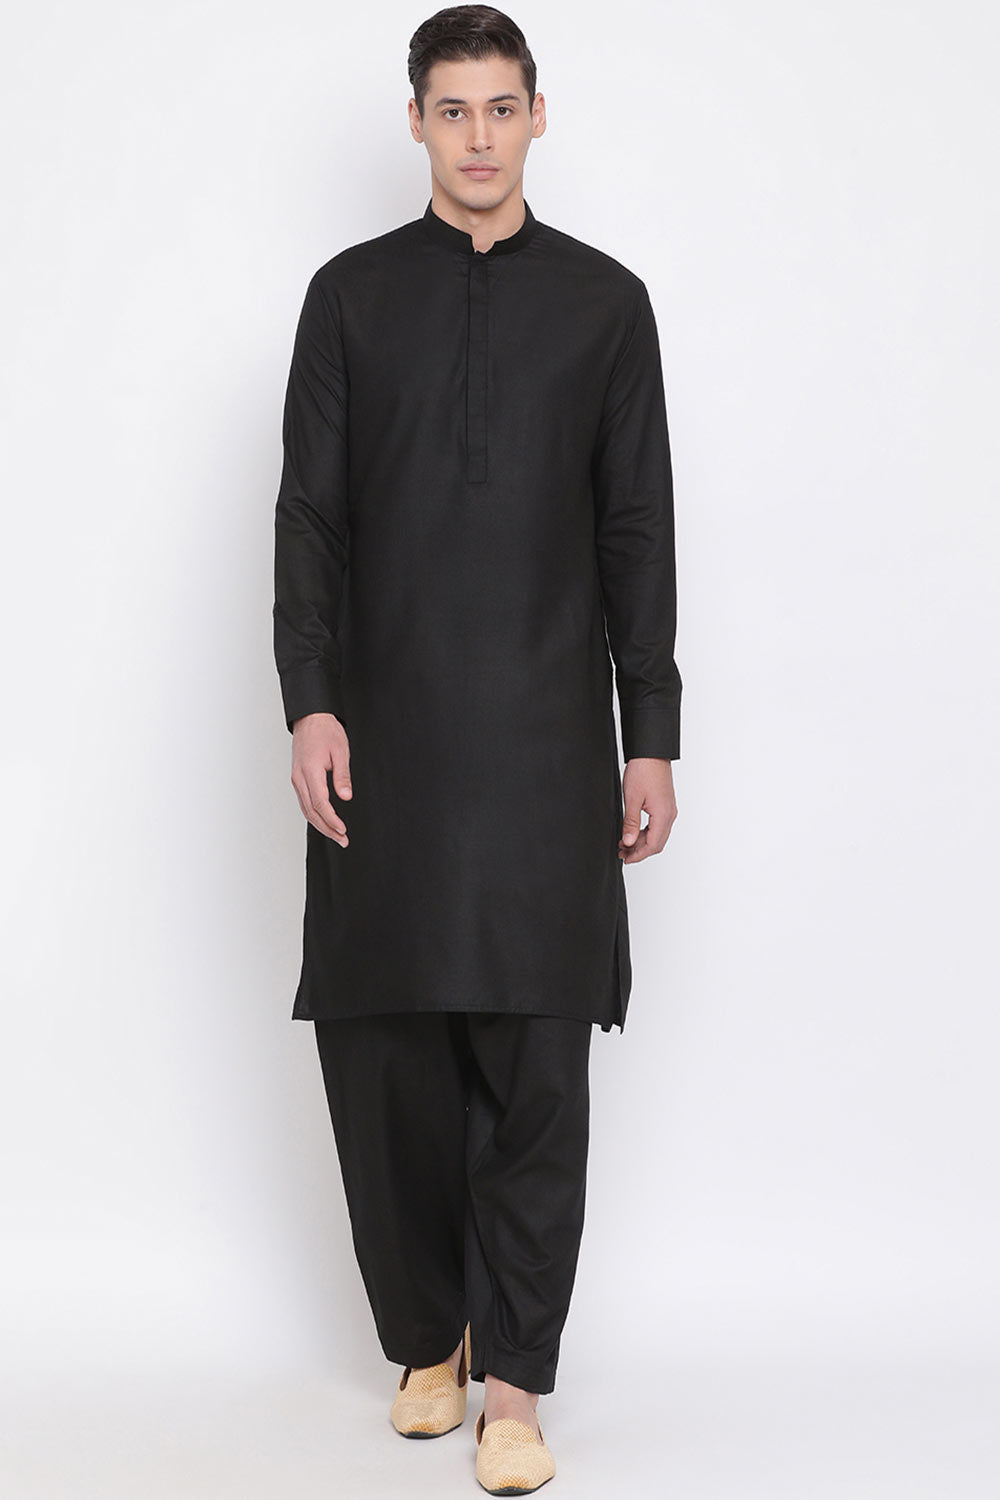 Buy Men's Blended Cotton Solid Kurta and Patiala Set in Black